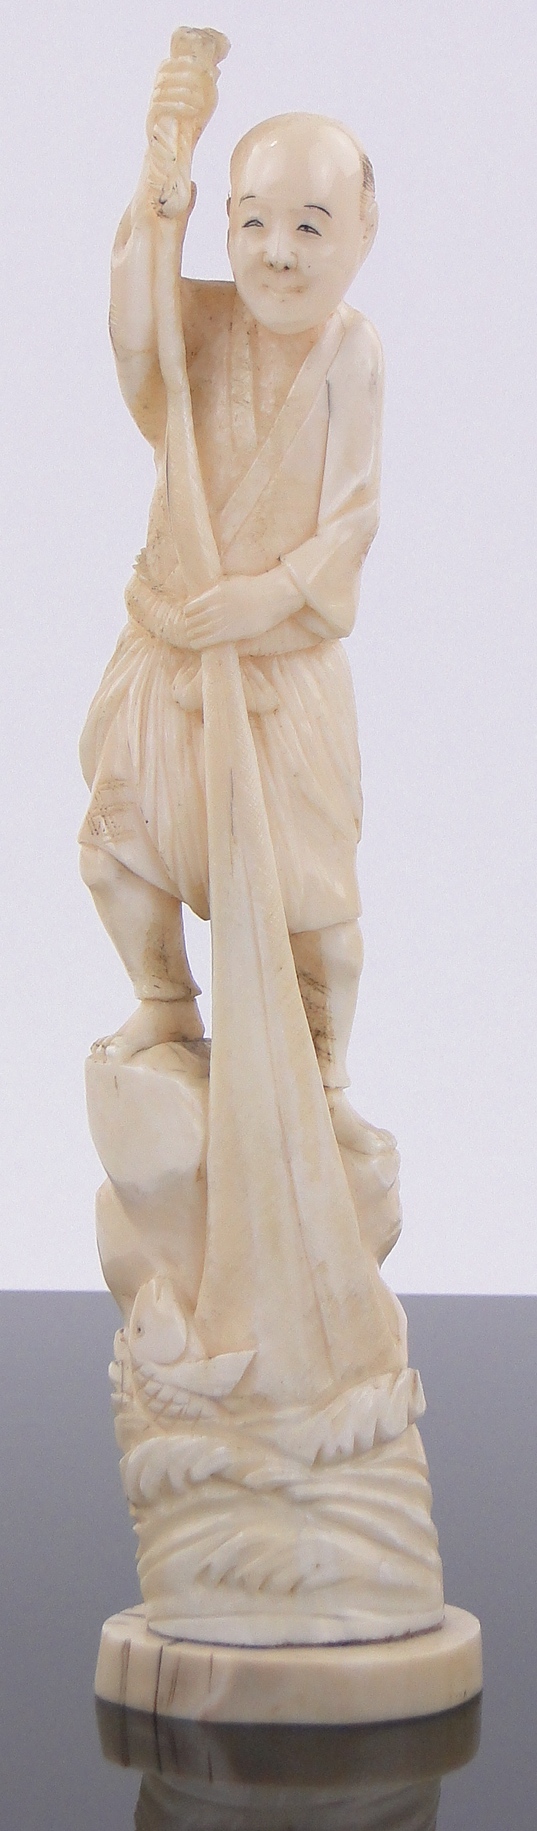 A 19th century Chinese carved ivory figure of a fisherman, signed under base, height 9".